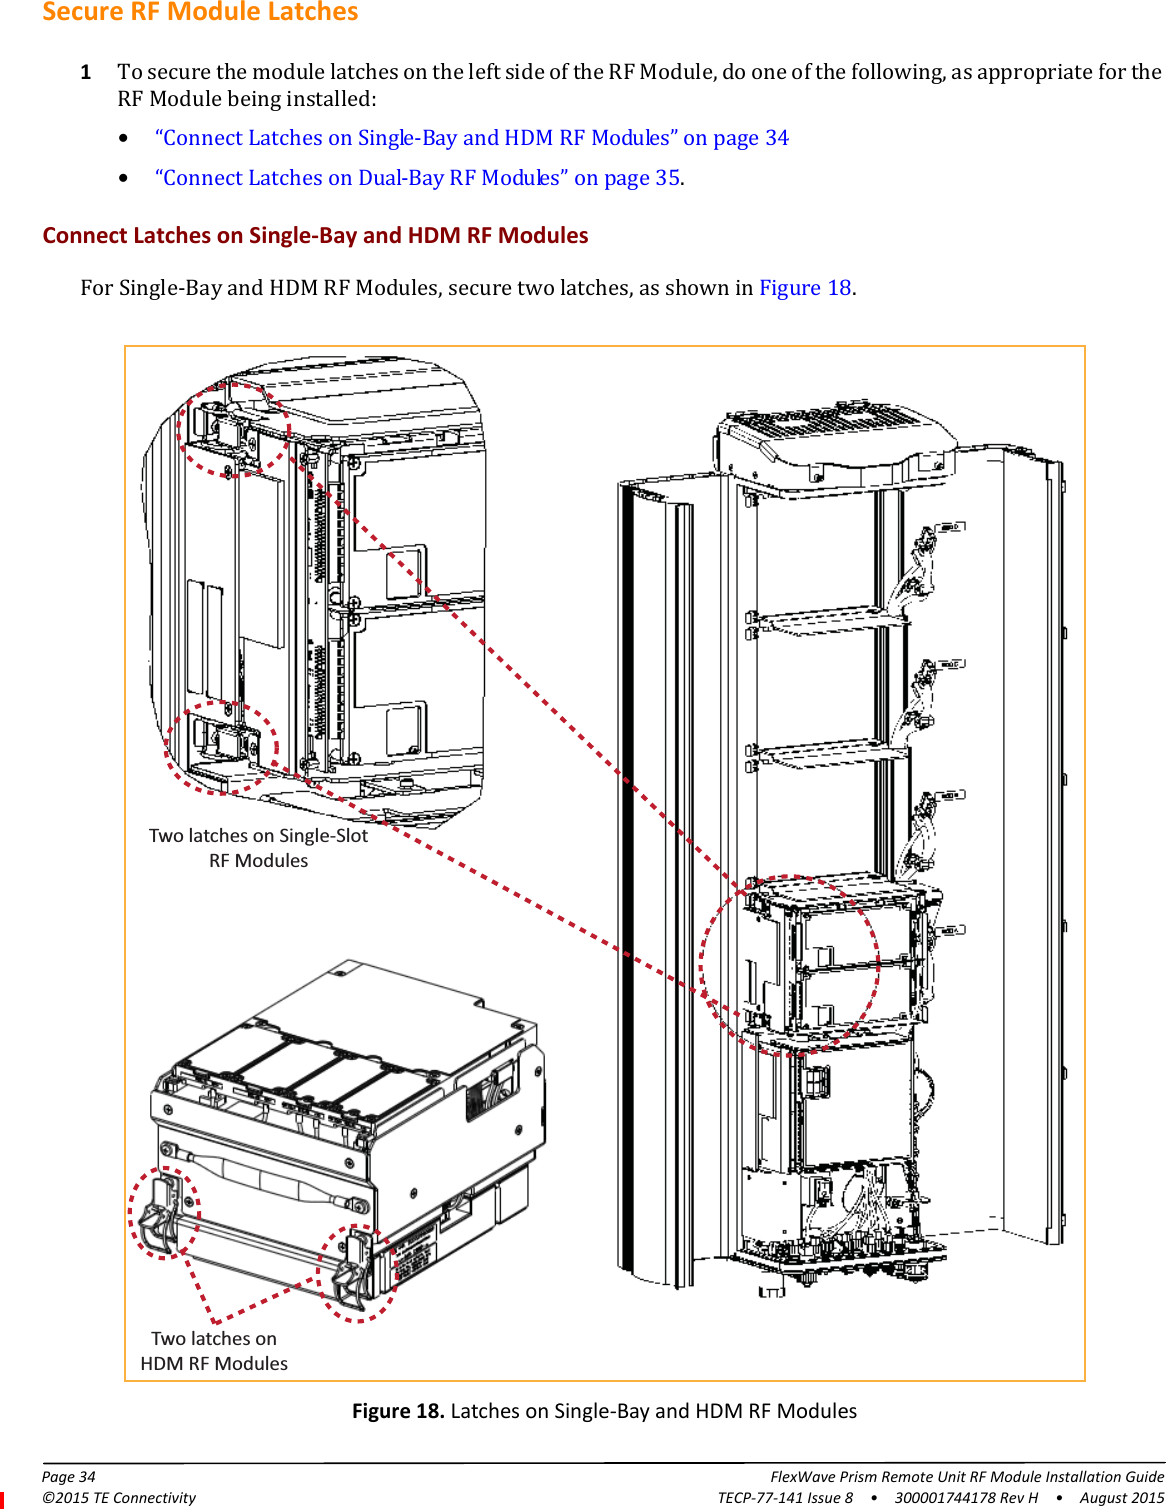 Page 34 FlexWave Prism Remote Unit RF Module Installation Guide©2015 TE Connectivity TECP-77-141 Issue 8  •  300001744178 Rev H  •  August 2015Secure RF Module Latches1To secure the module latches on the left side of the RF Module, do one of the following, as appropriate for the RF Module being installed:•“Connect Latches on Single-Bay and HDM RF Modules” on page 34•“Connect Latches on Dual-Bay RF Modules” on page 35.Connect Latches on Single-Bay and HDM RF ModulesFor Single-Bay and HDM RF Modules, secure two latches, as shown in Figure 18.Two latches on Single-SlotRF ModulesTwo latches onHDM RF ModulesFigure 18. Latches on Single-Bay and HDM RF Modules